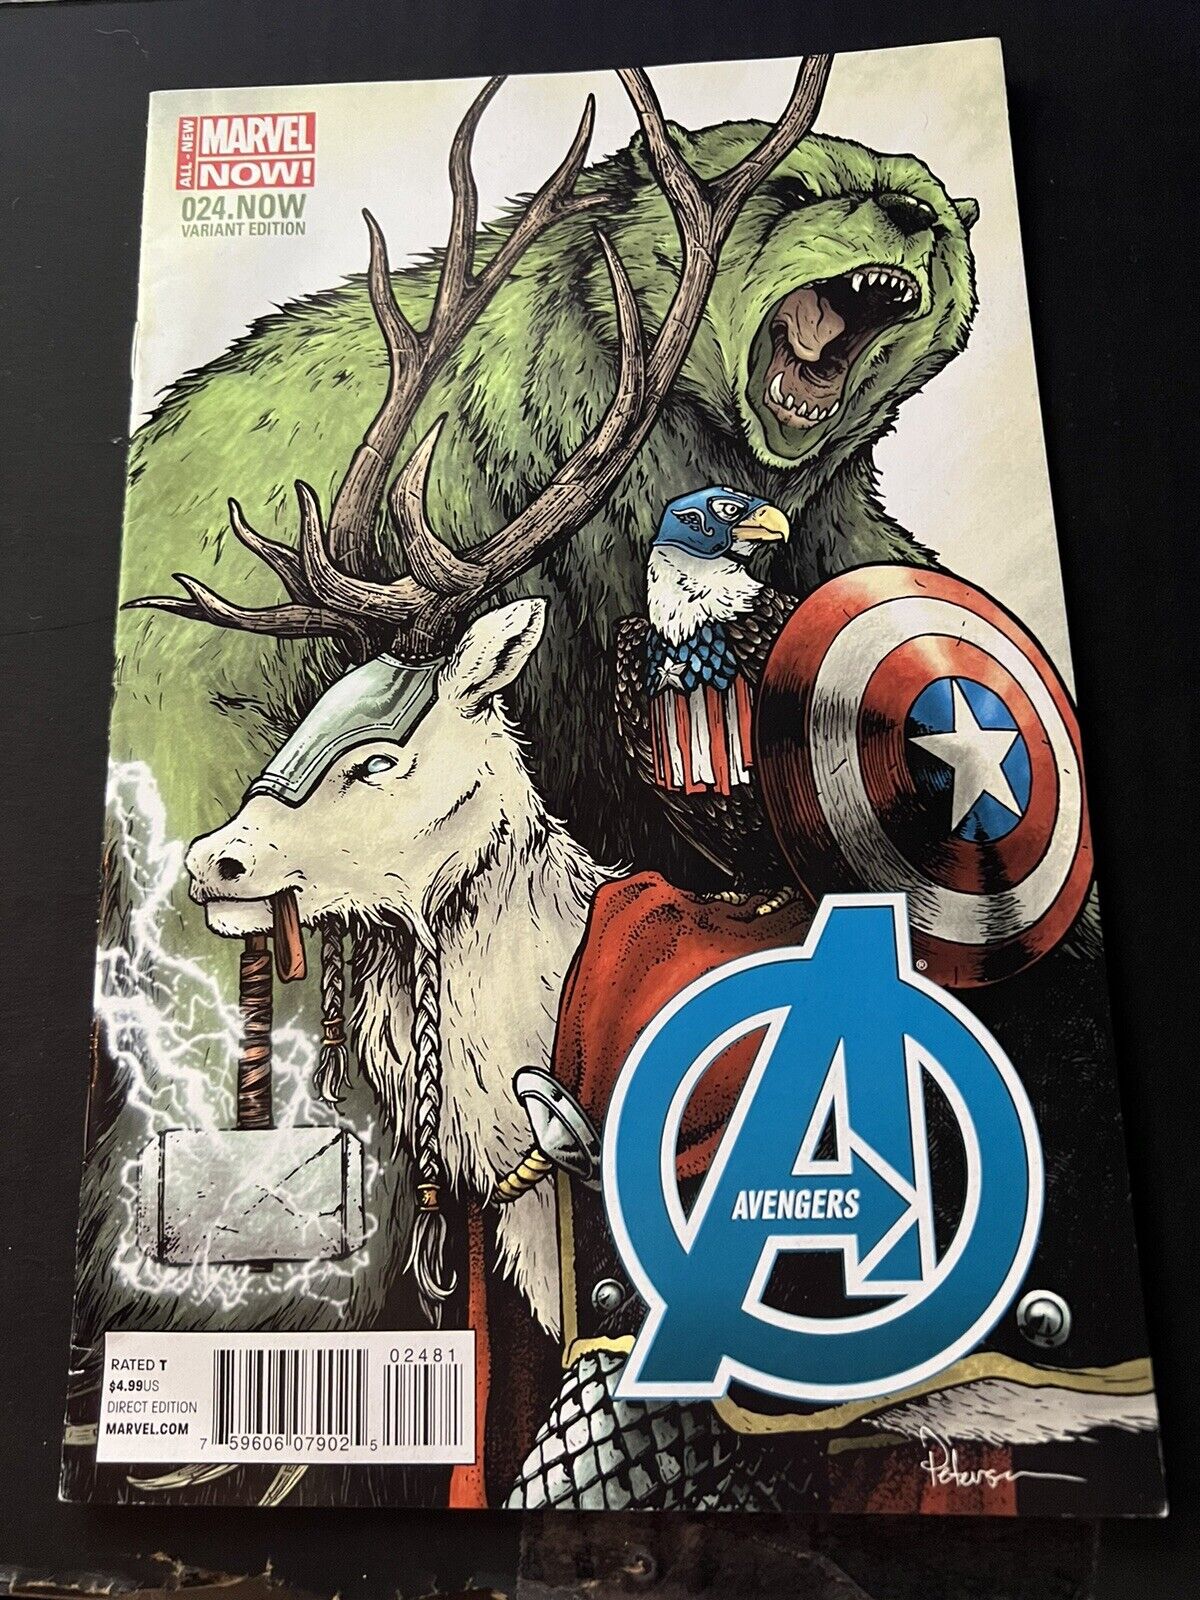 Rogue Planet #24 Variant Edition Avengers comic